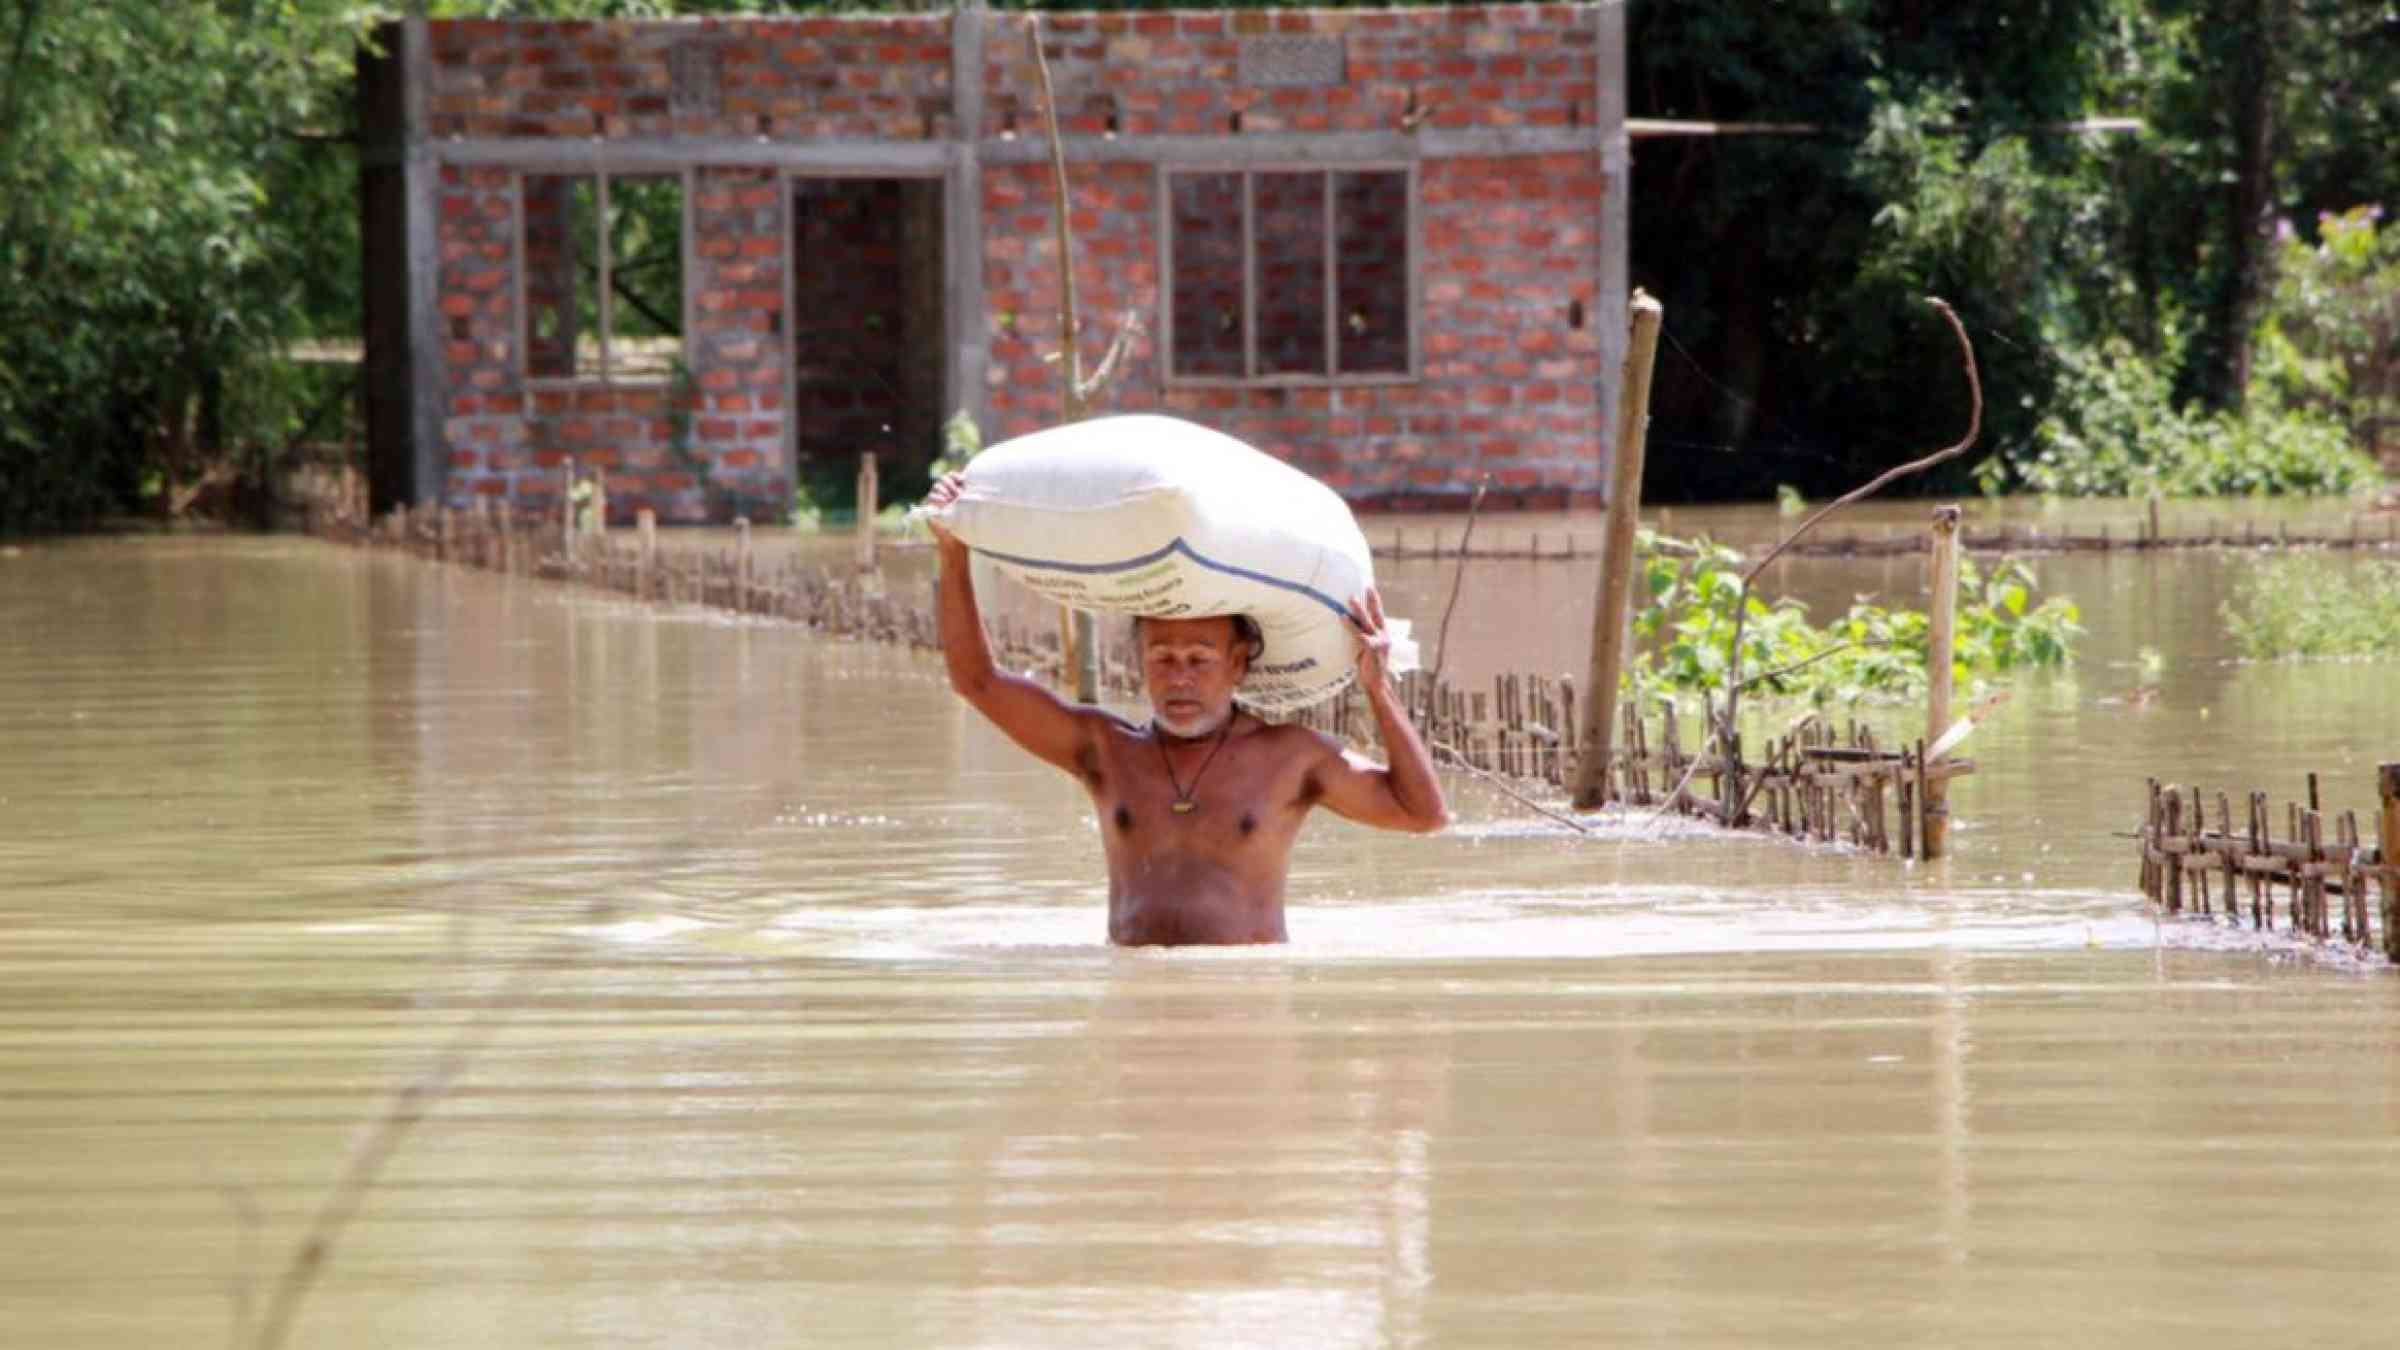 A man shifting his food grains to the high land as the flood water submerged his house in Assam, India (May 2020). Simanta Talukdar/Shutterstock